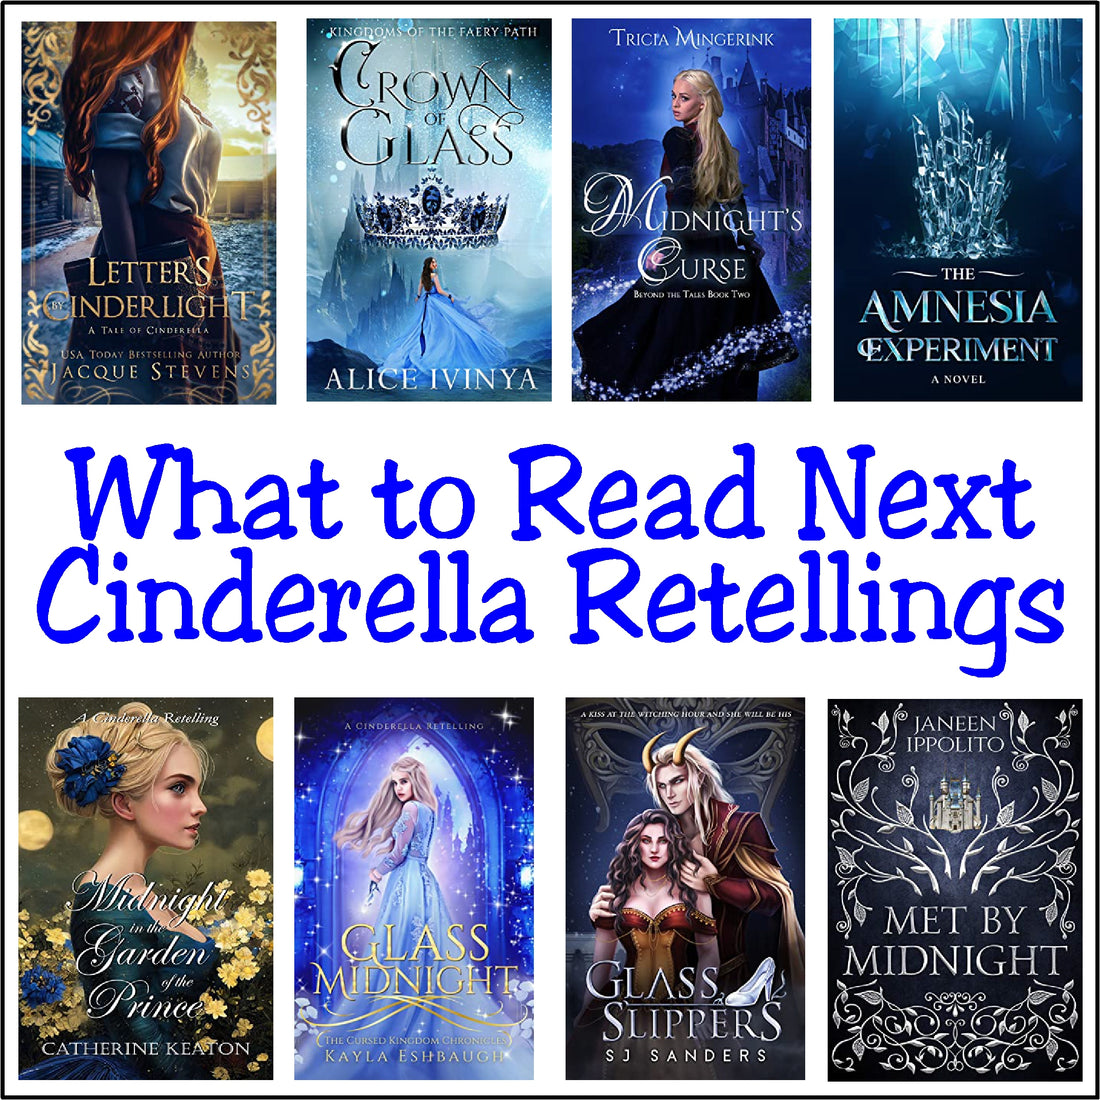 Lets Go to the Ball with Cinderella Retellings